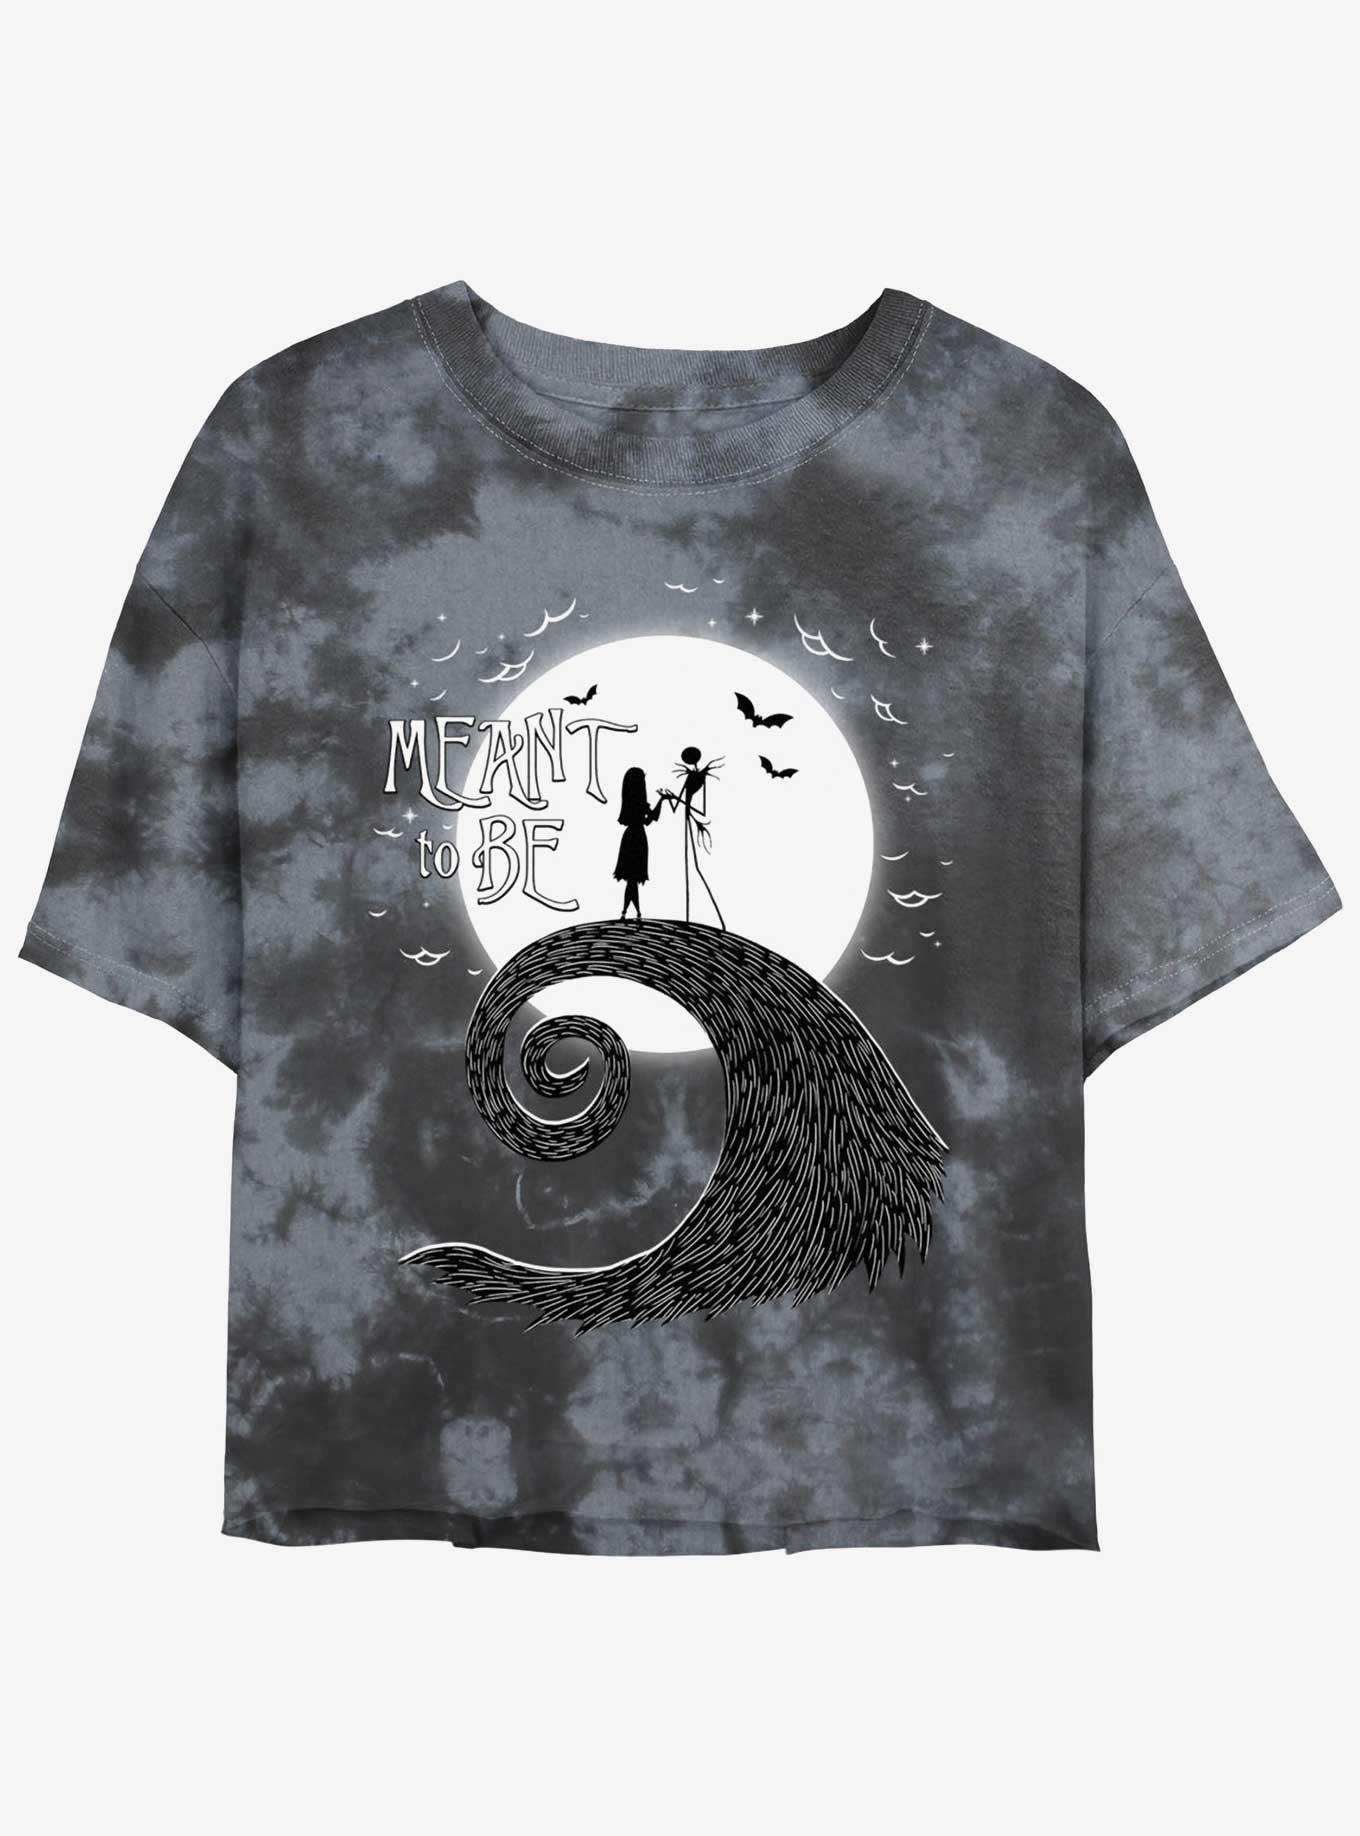 Disney The Nightmare Before Christmas Jack and Sally Meant To Be Tie-Dye Girls Crop T-Shirt, BLKCHAR, hi-res